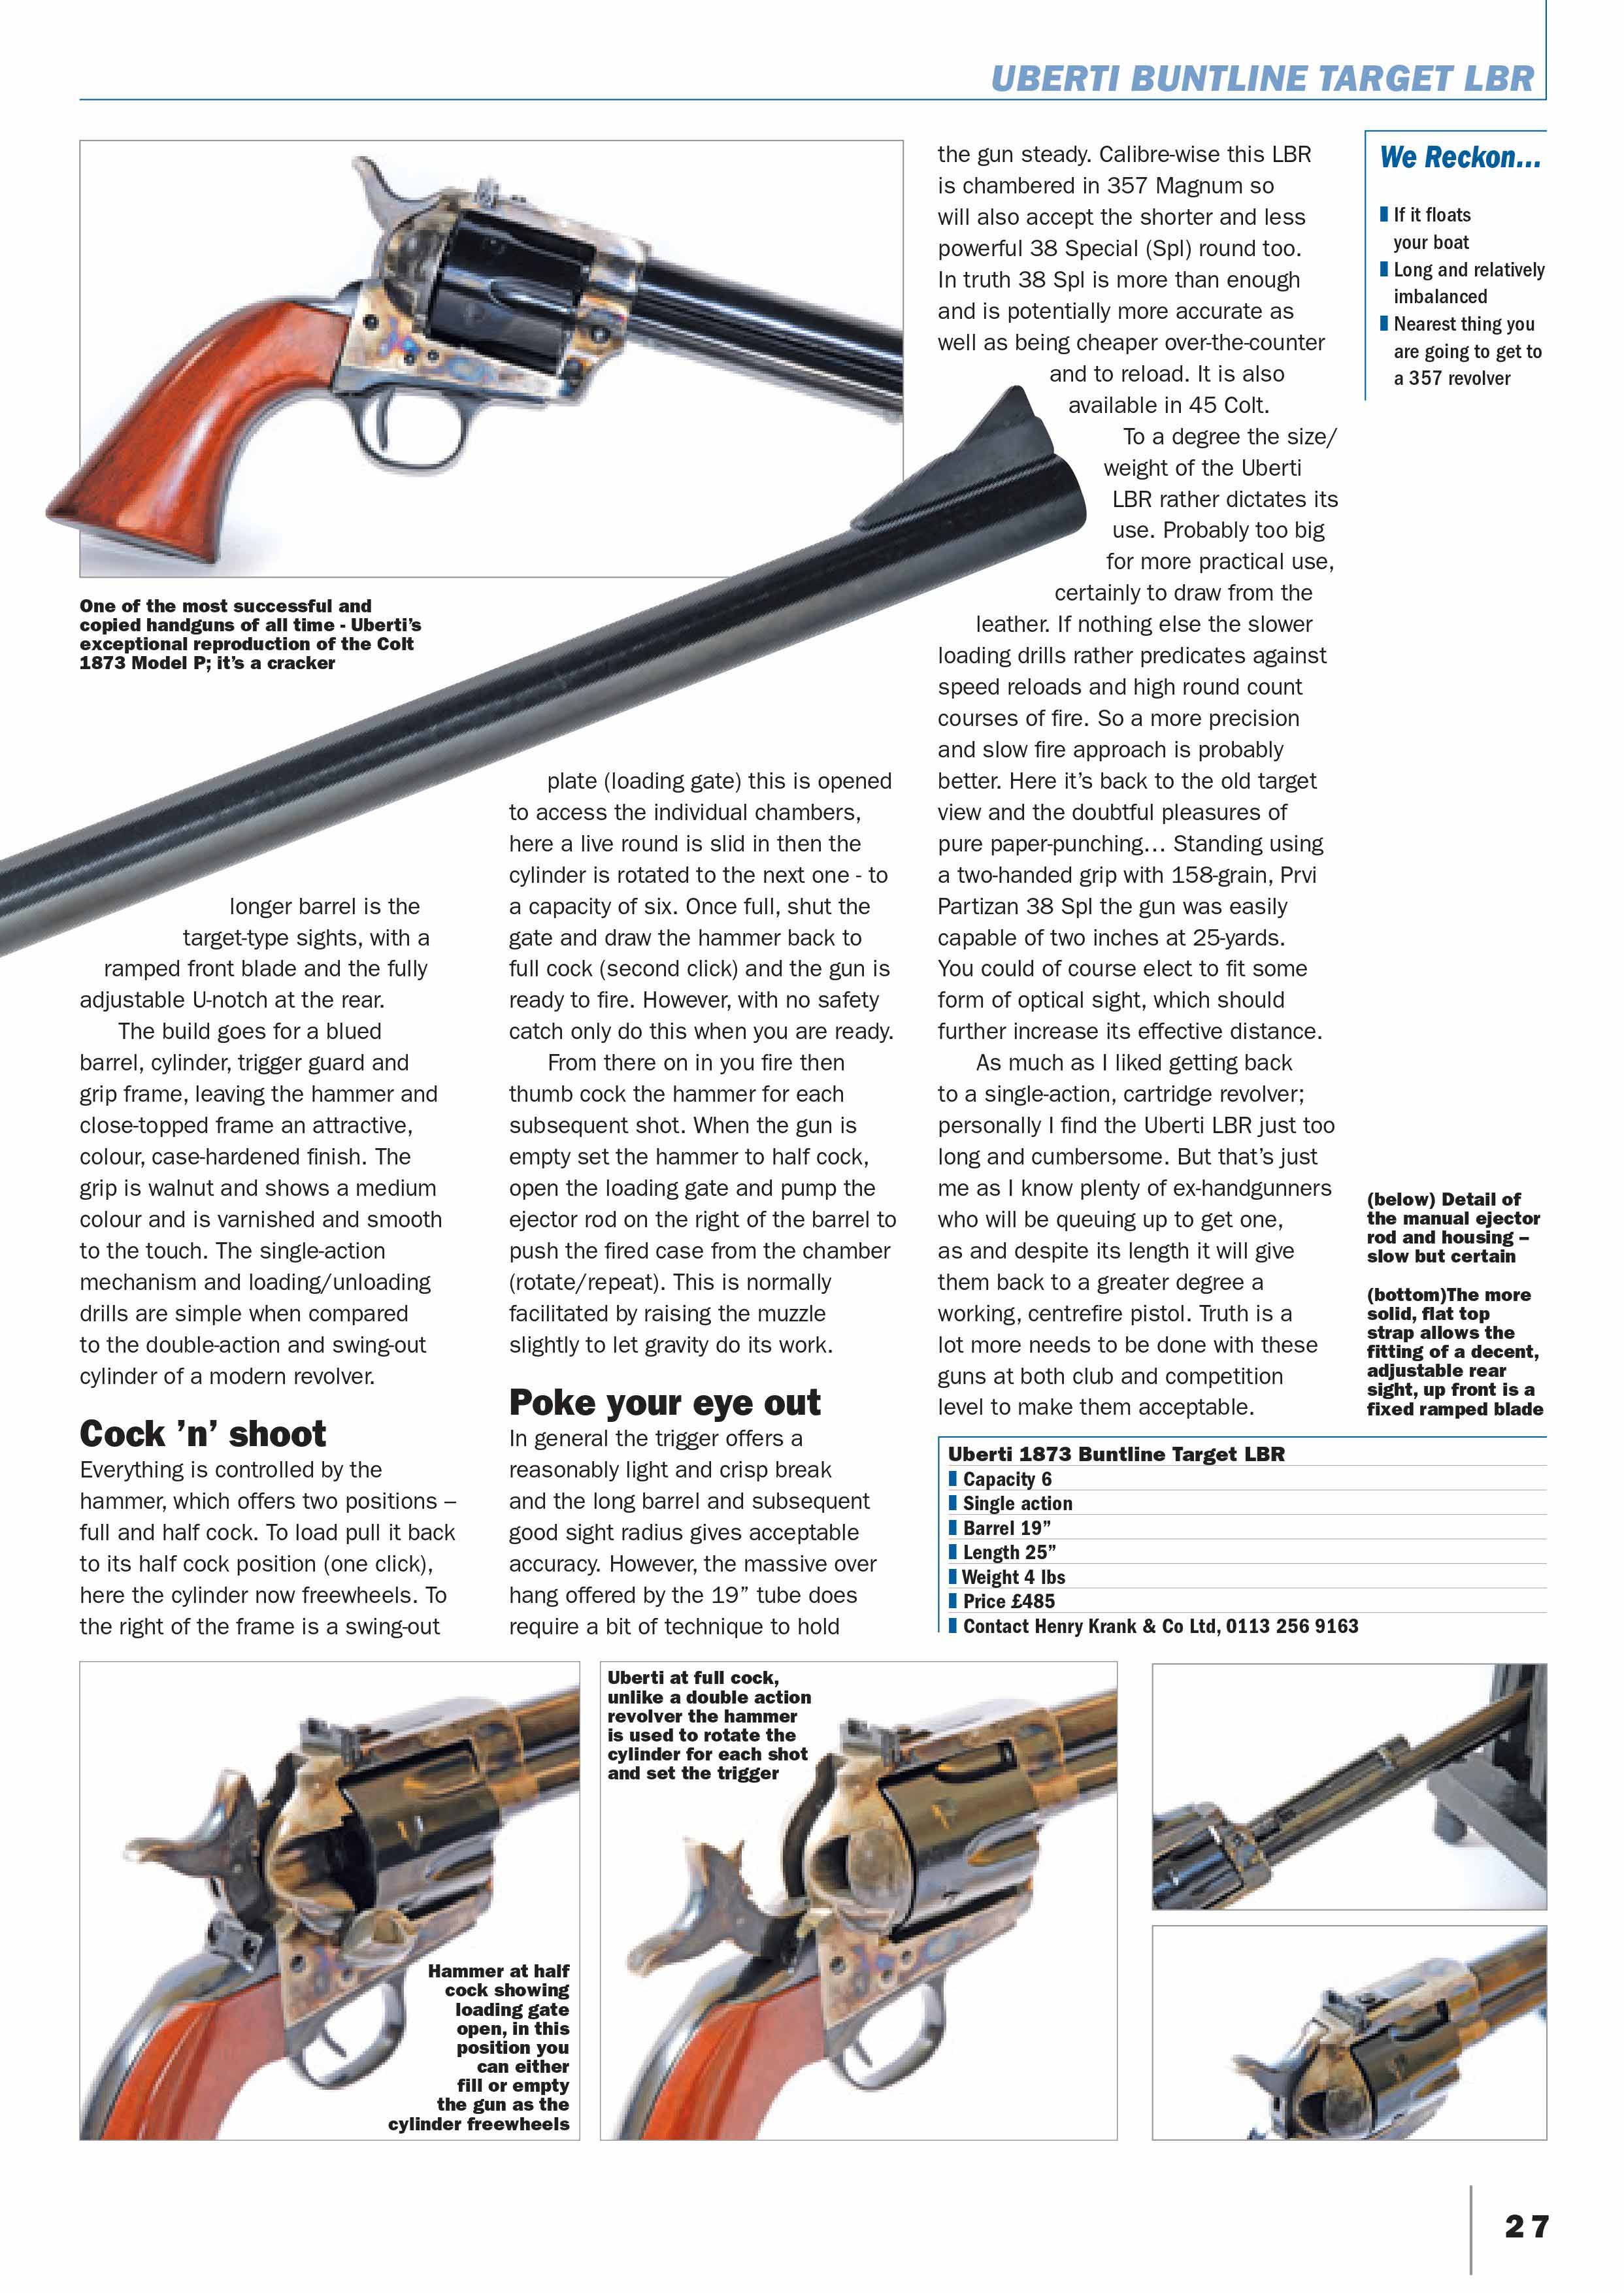 shooting sports article page two